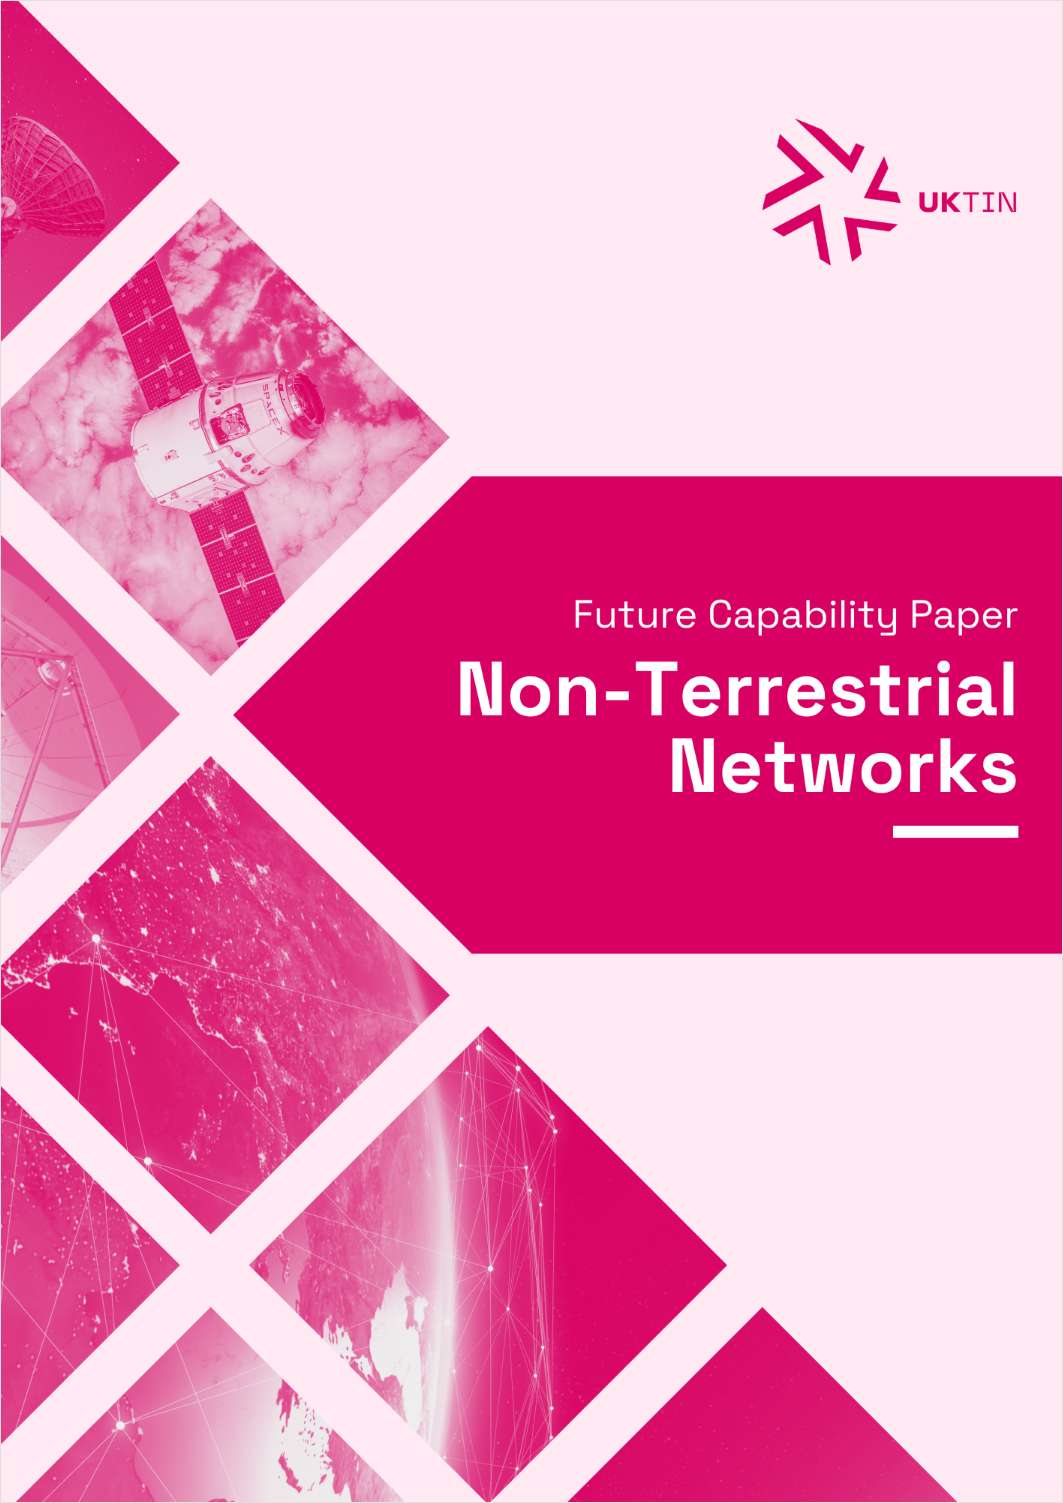 Non-Terrestrial Networks (NTN): Expert Working Group Future Capability Paper